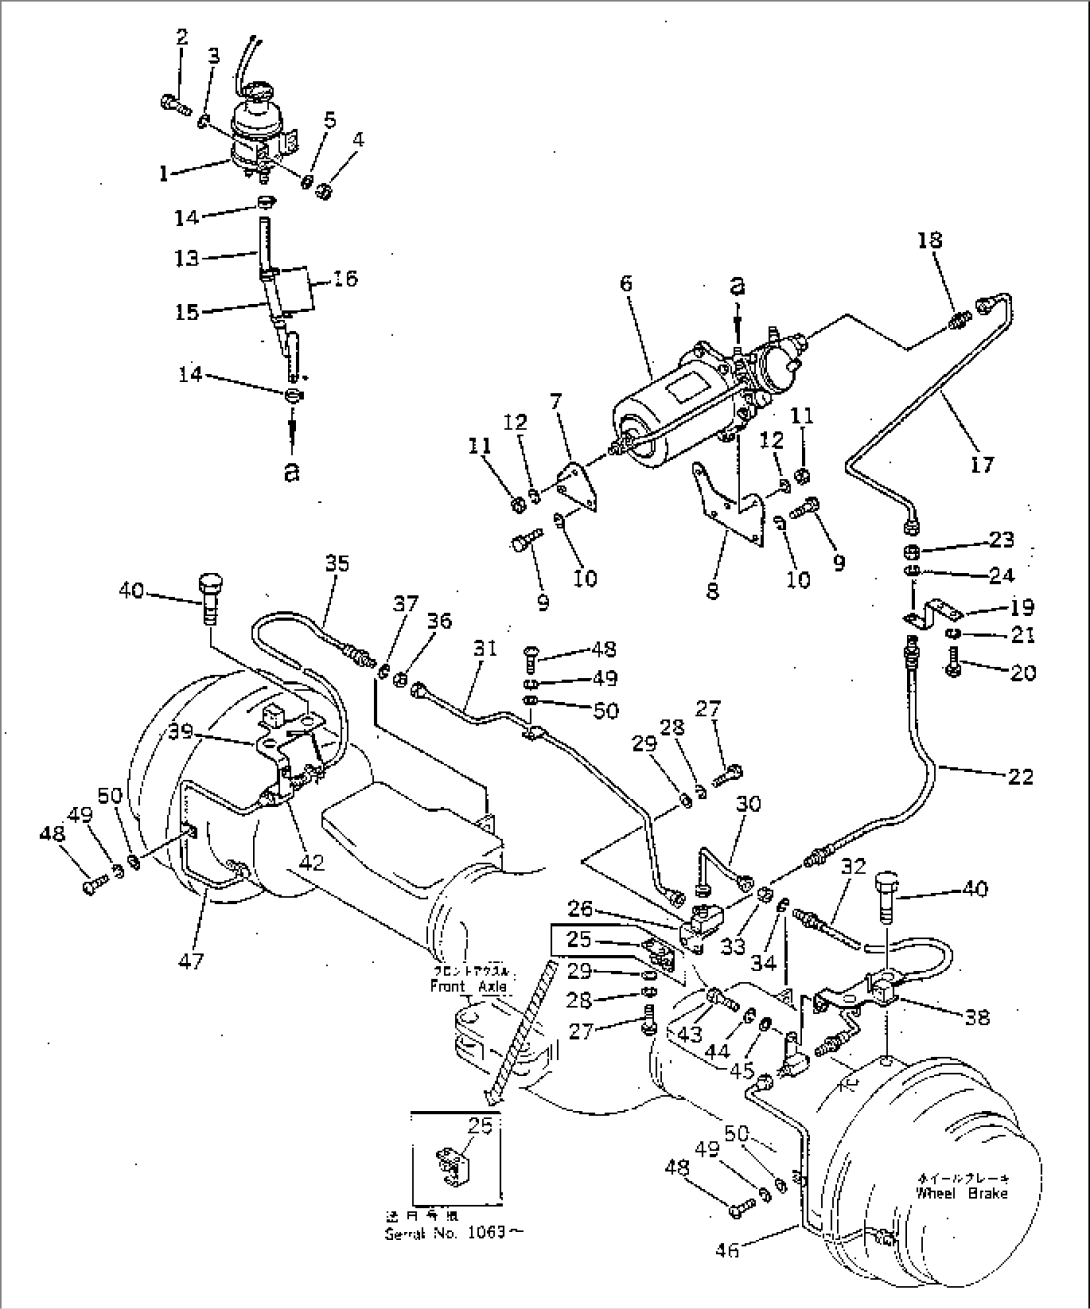 BRAKE PIPING (OIL RESERVOIR AND FRONT LINE)